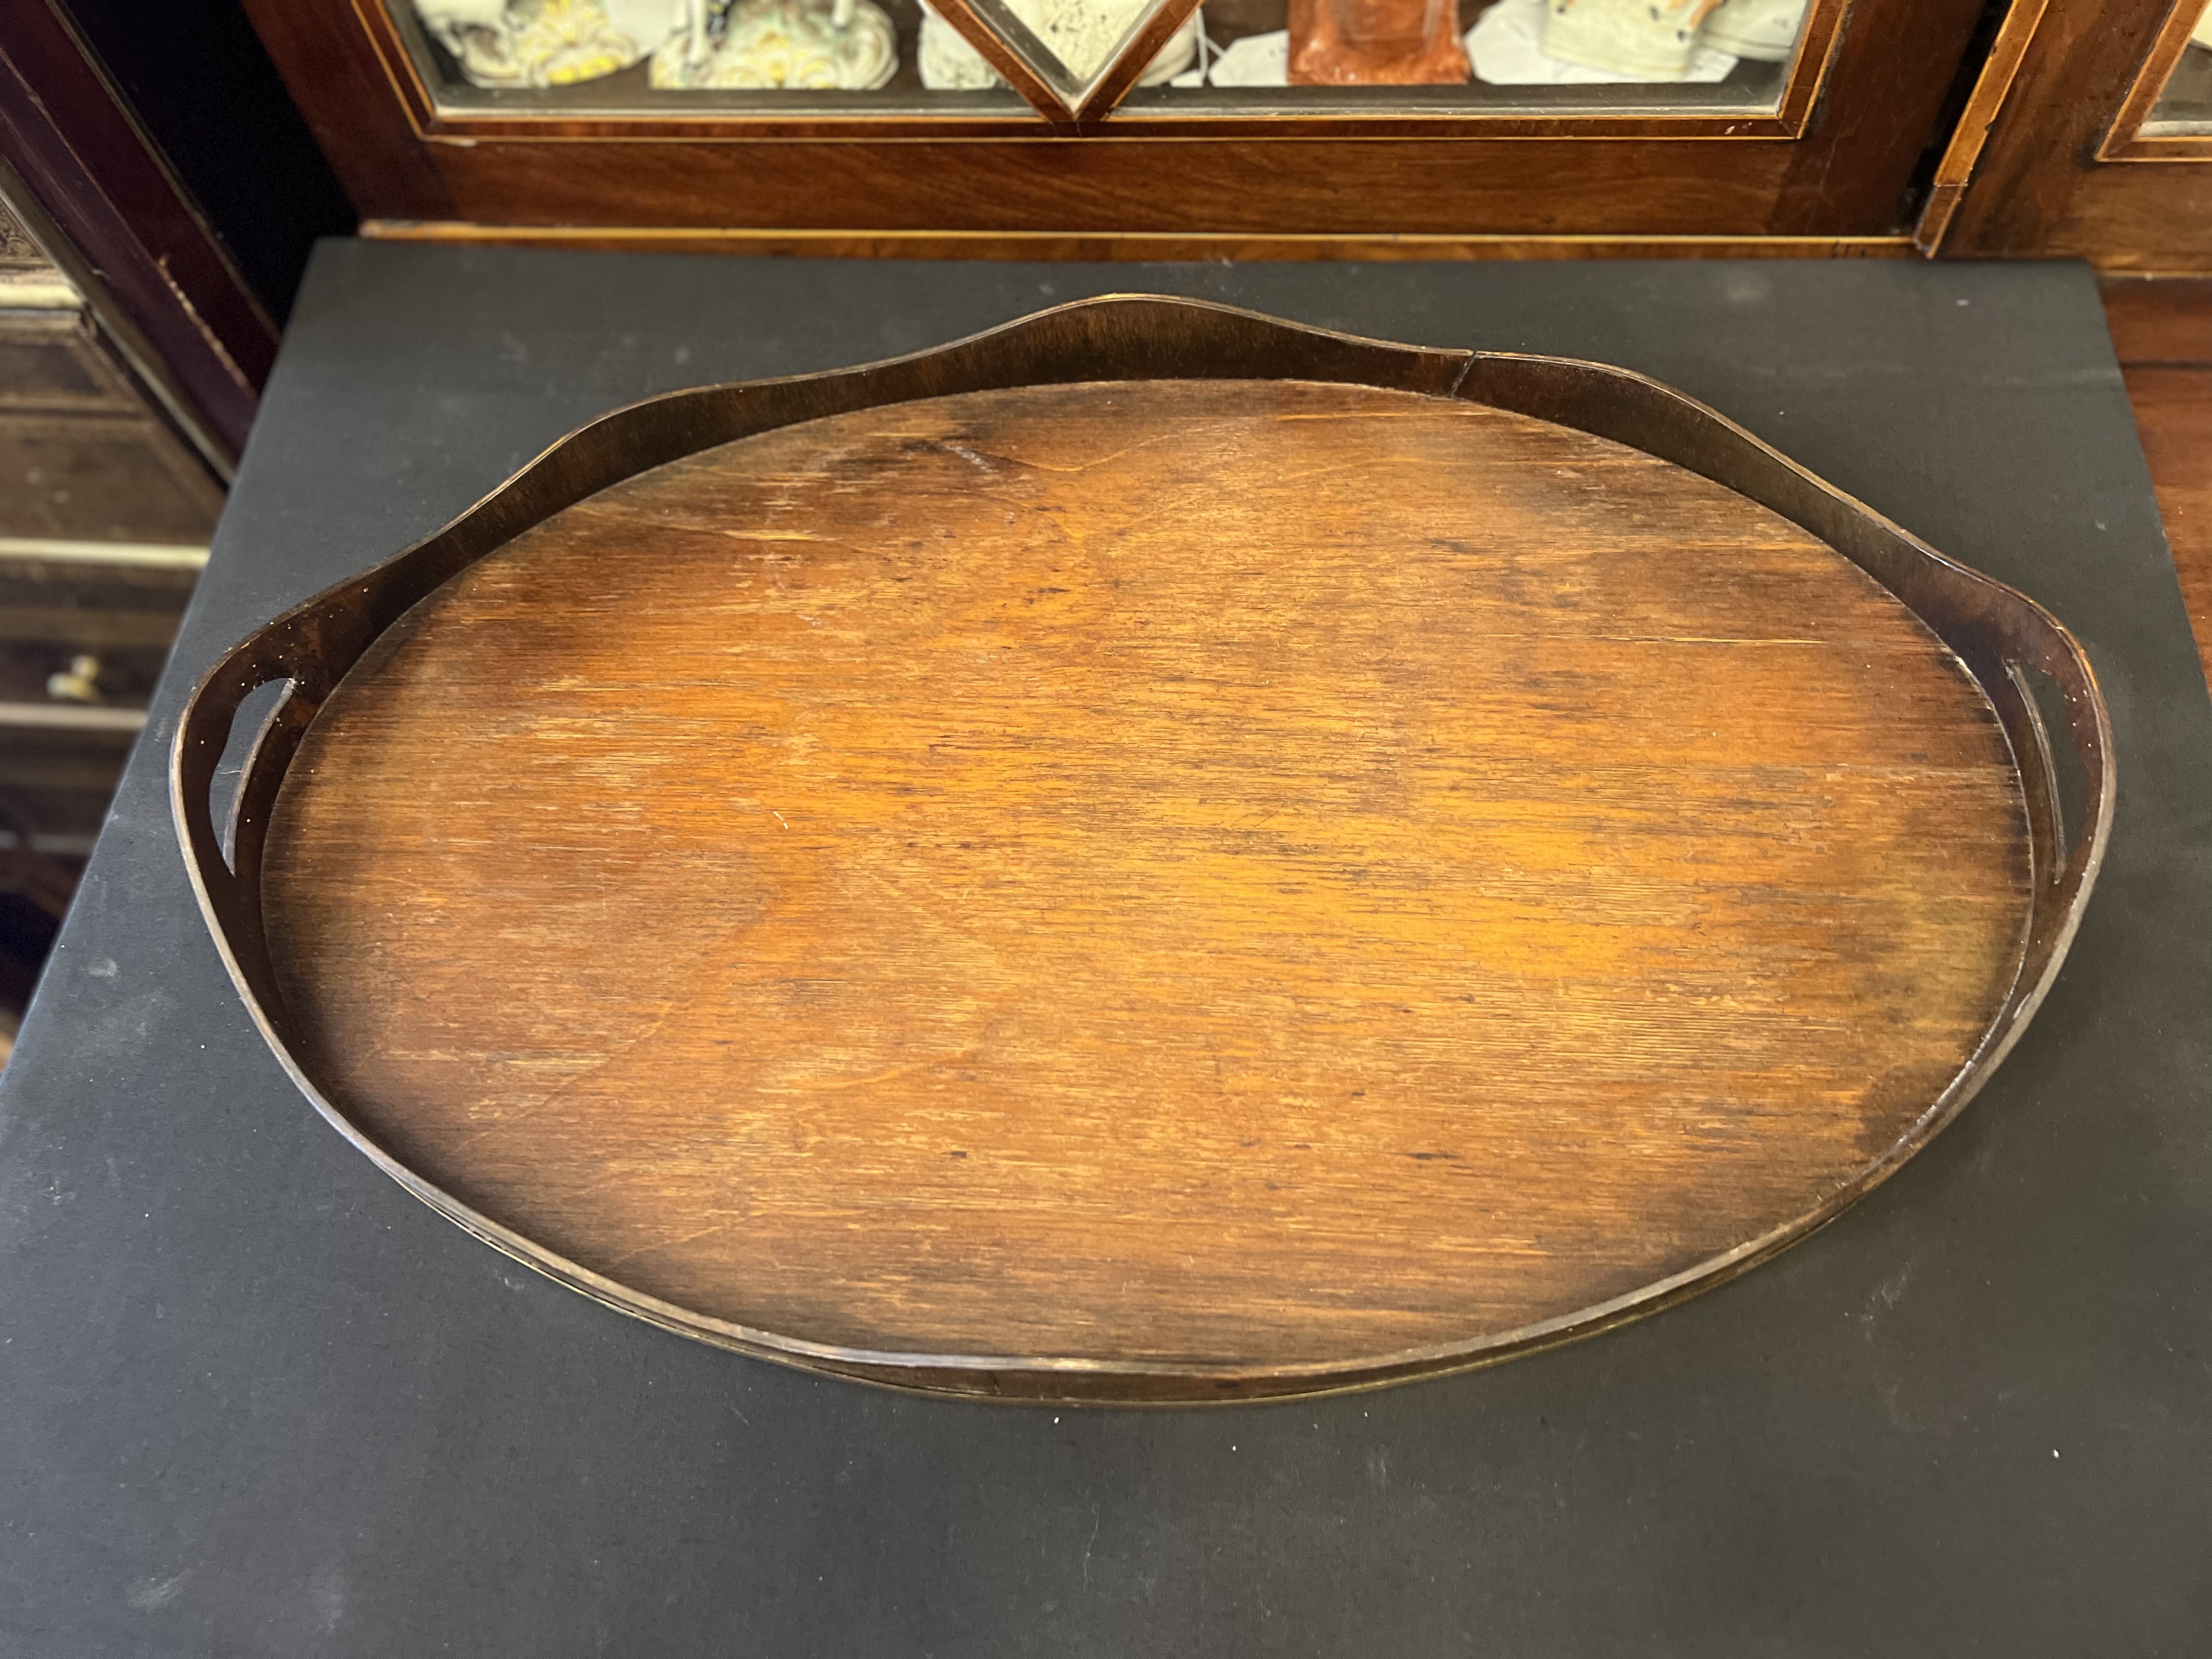 Oval Hardwood Tray with Brass Band - Image 2 of 2